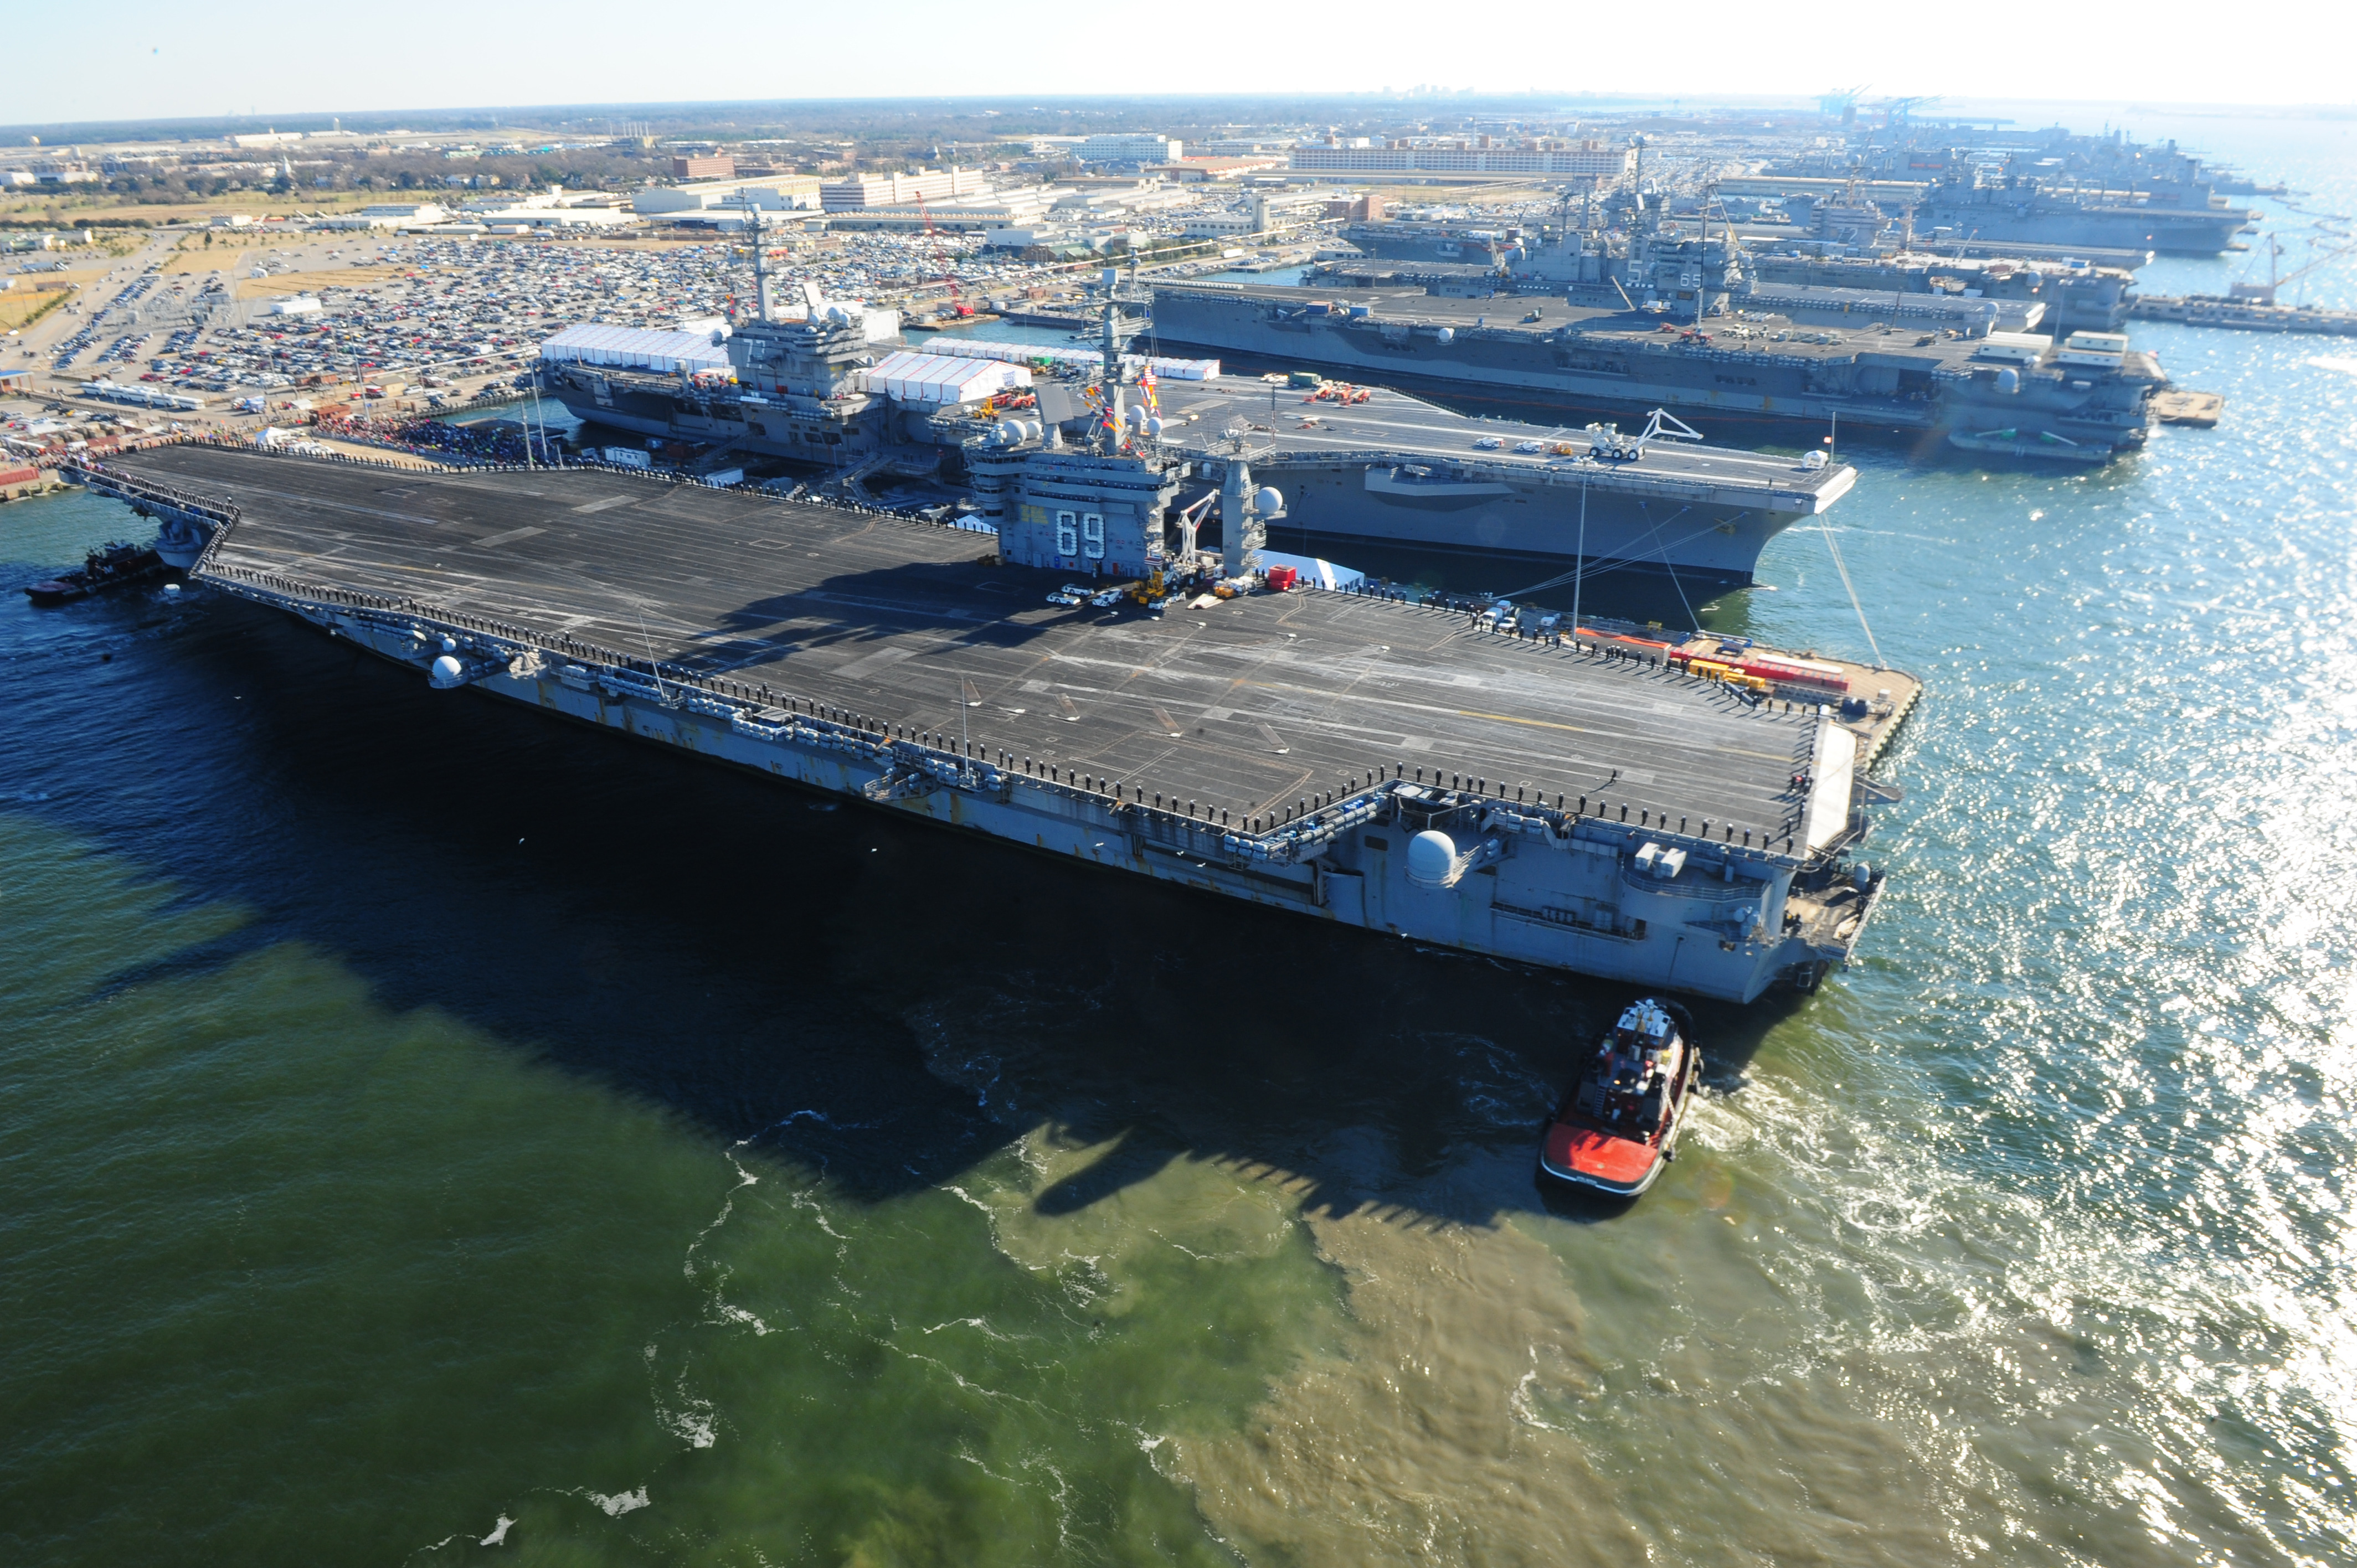 The aircraft carrier USS Dwight D. Eisenhower (CVN 69) makes its approach pierside at Naval Station Norfolk after a six-month deployment to the U.S. 5th and 6th Fleet areas of responsibility in support of Operation Enduring Freedom, maritime security oper